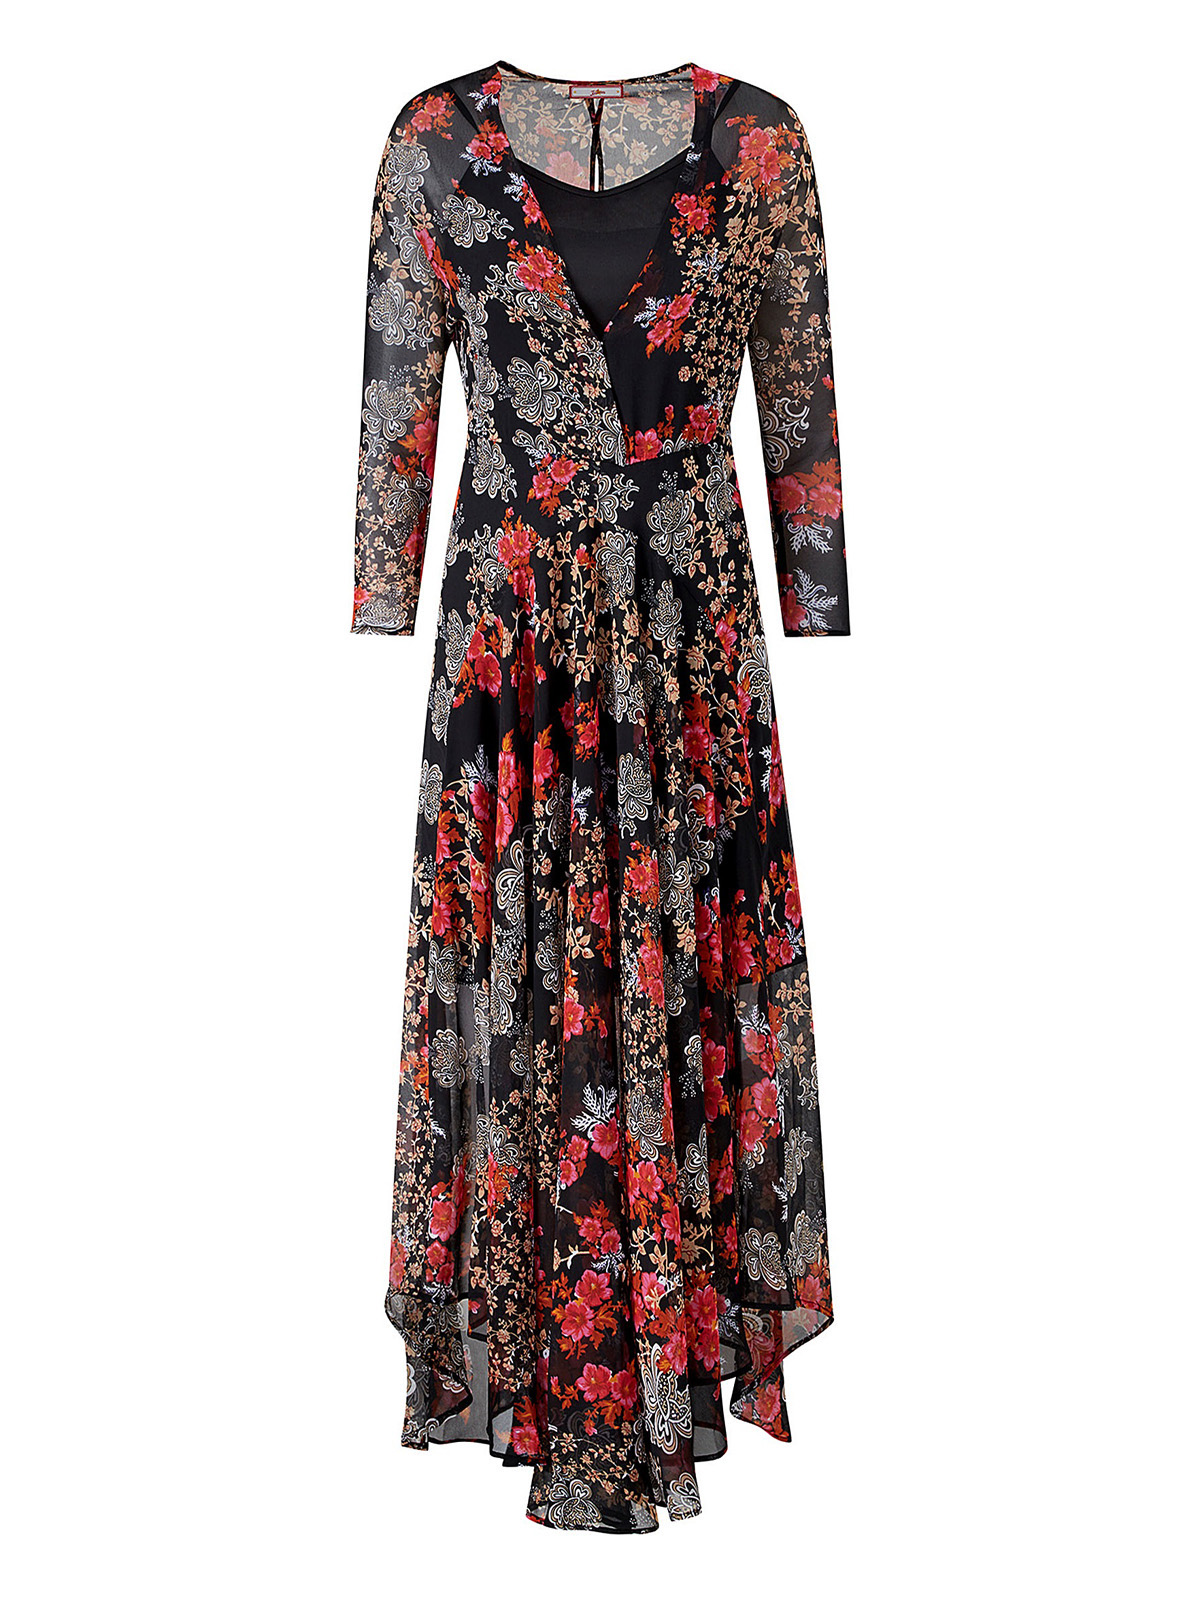 Joe Browns - - Joe Browns ASSORTED Dresses & Trousers - Plus Size 22 to 30